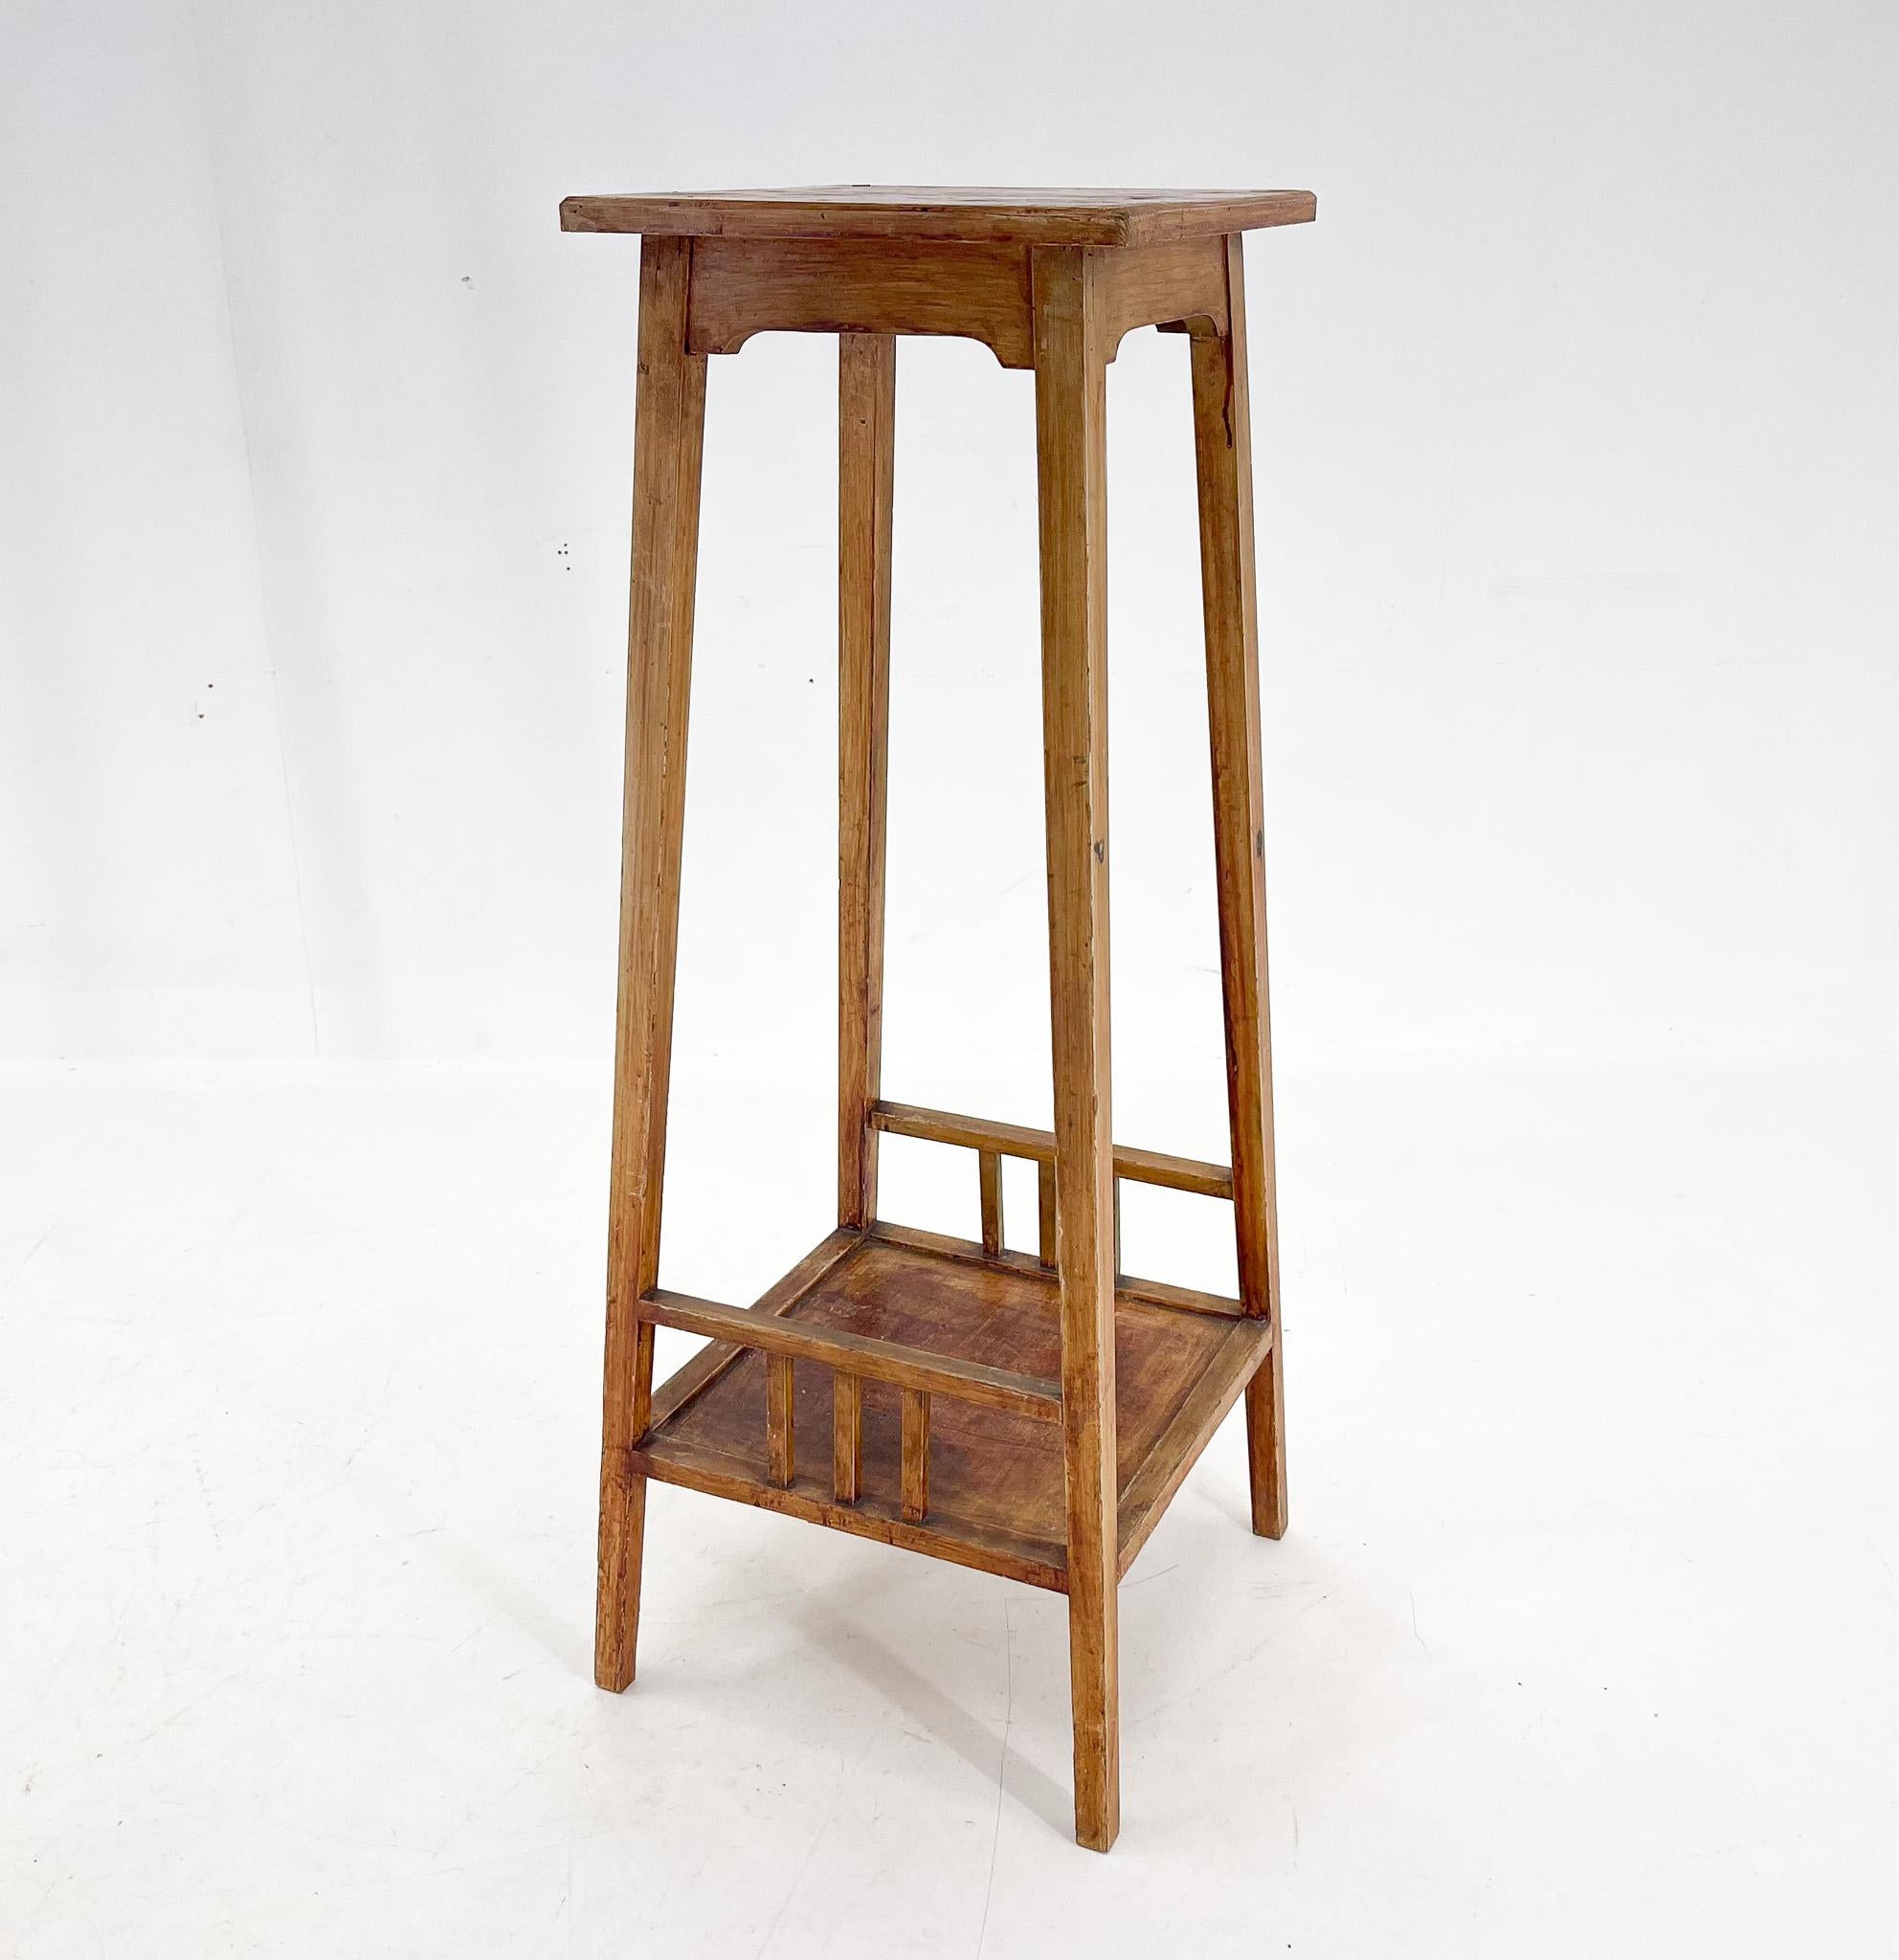 Czech Tall Wooden Plant Stand, 1930s For Sale